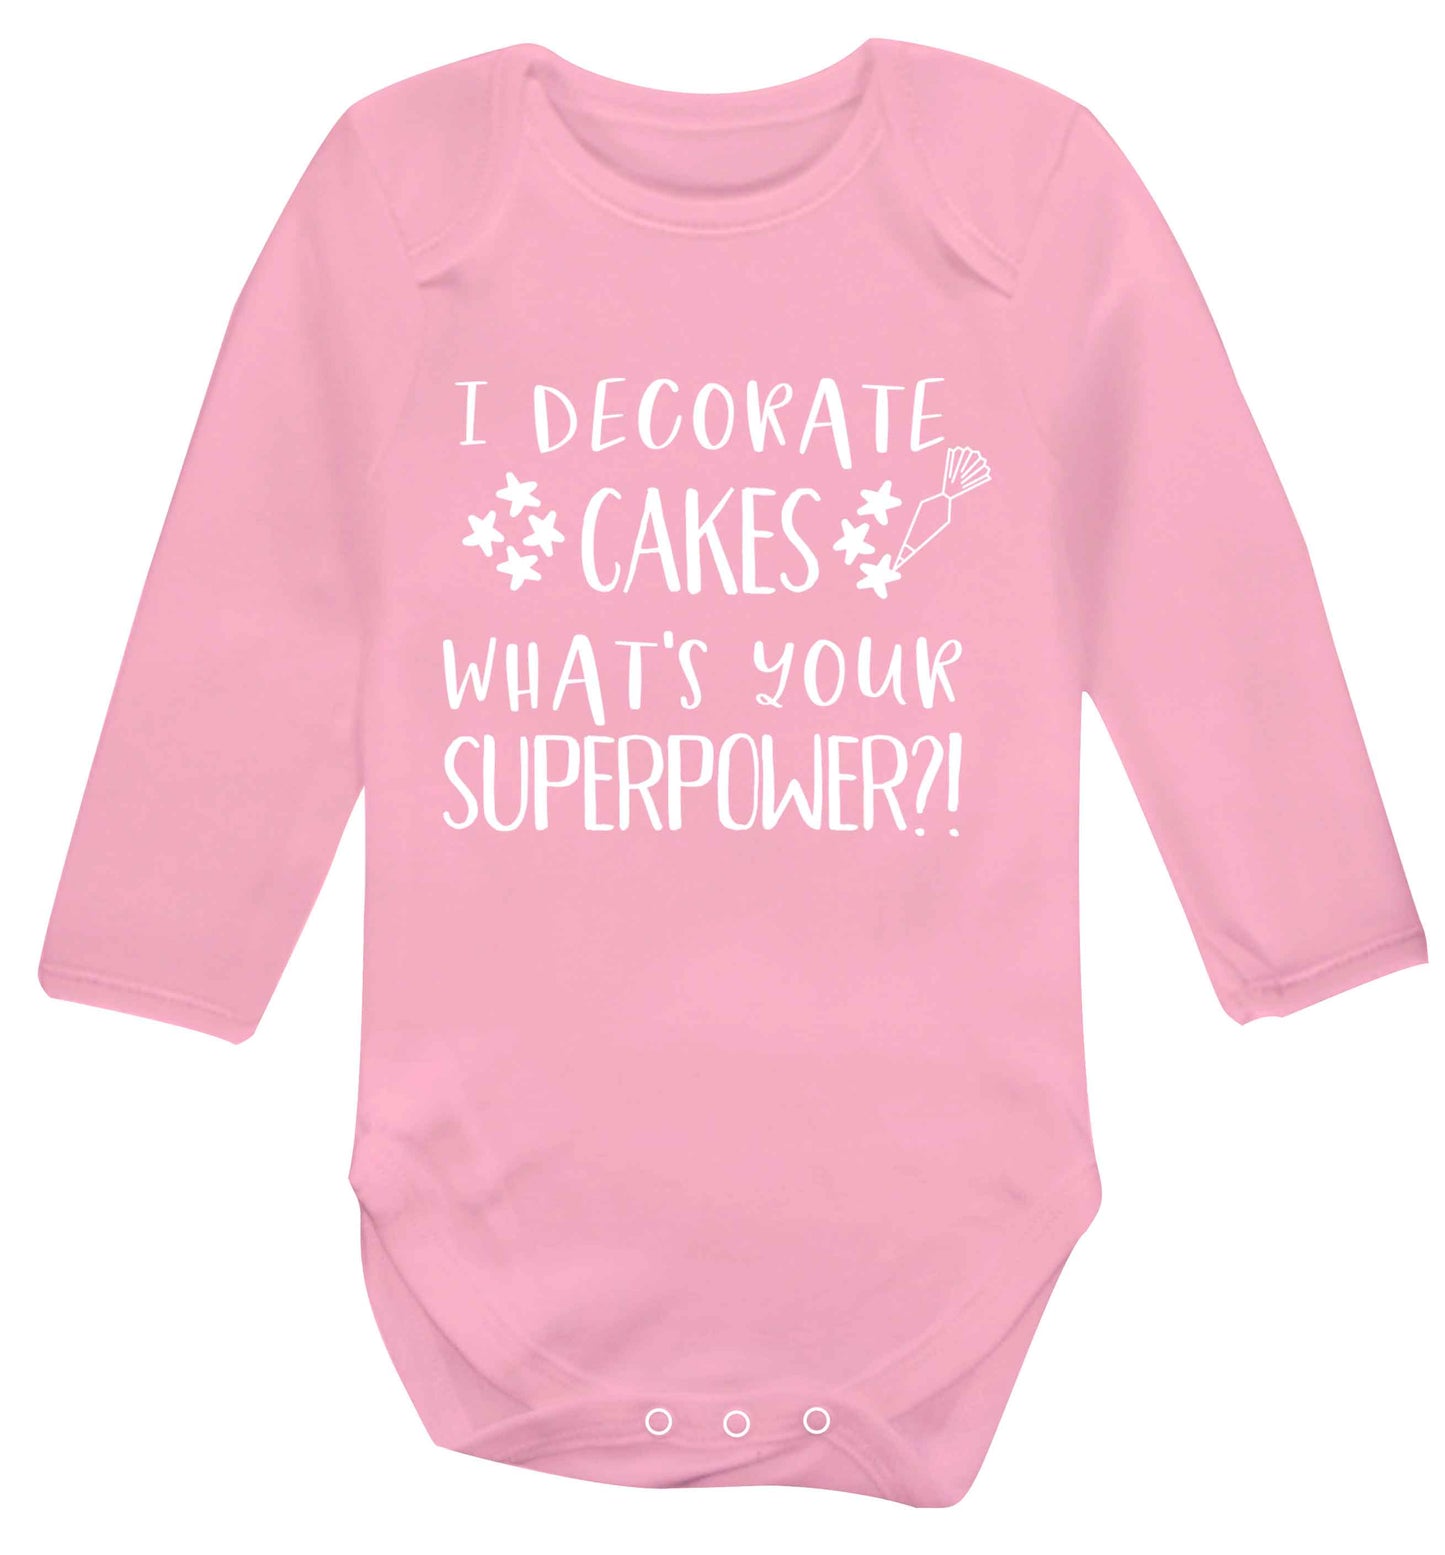 I decorate cakes what's your superpower?! Baby Vest long sleeved pale pink 6-12 months